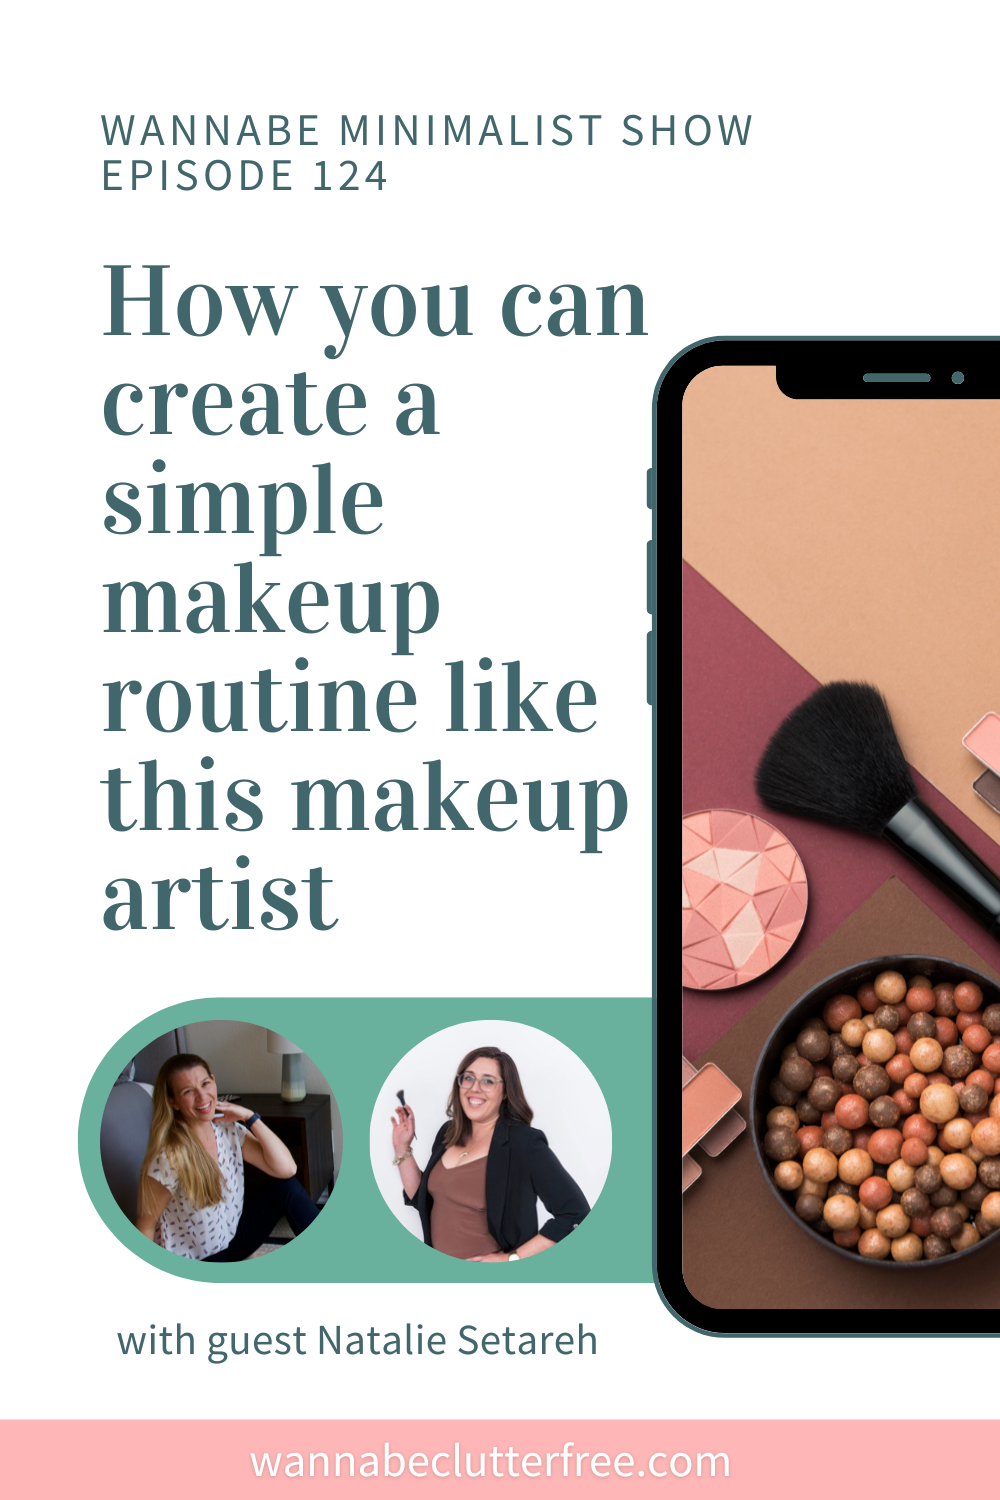 How you can create a simple makeup routine like this makeup artist